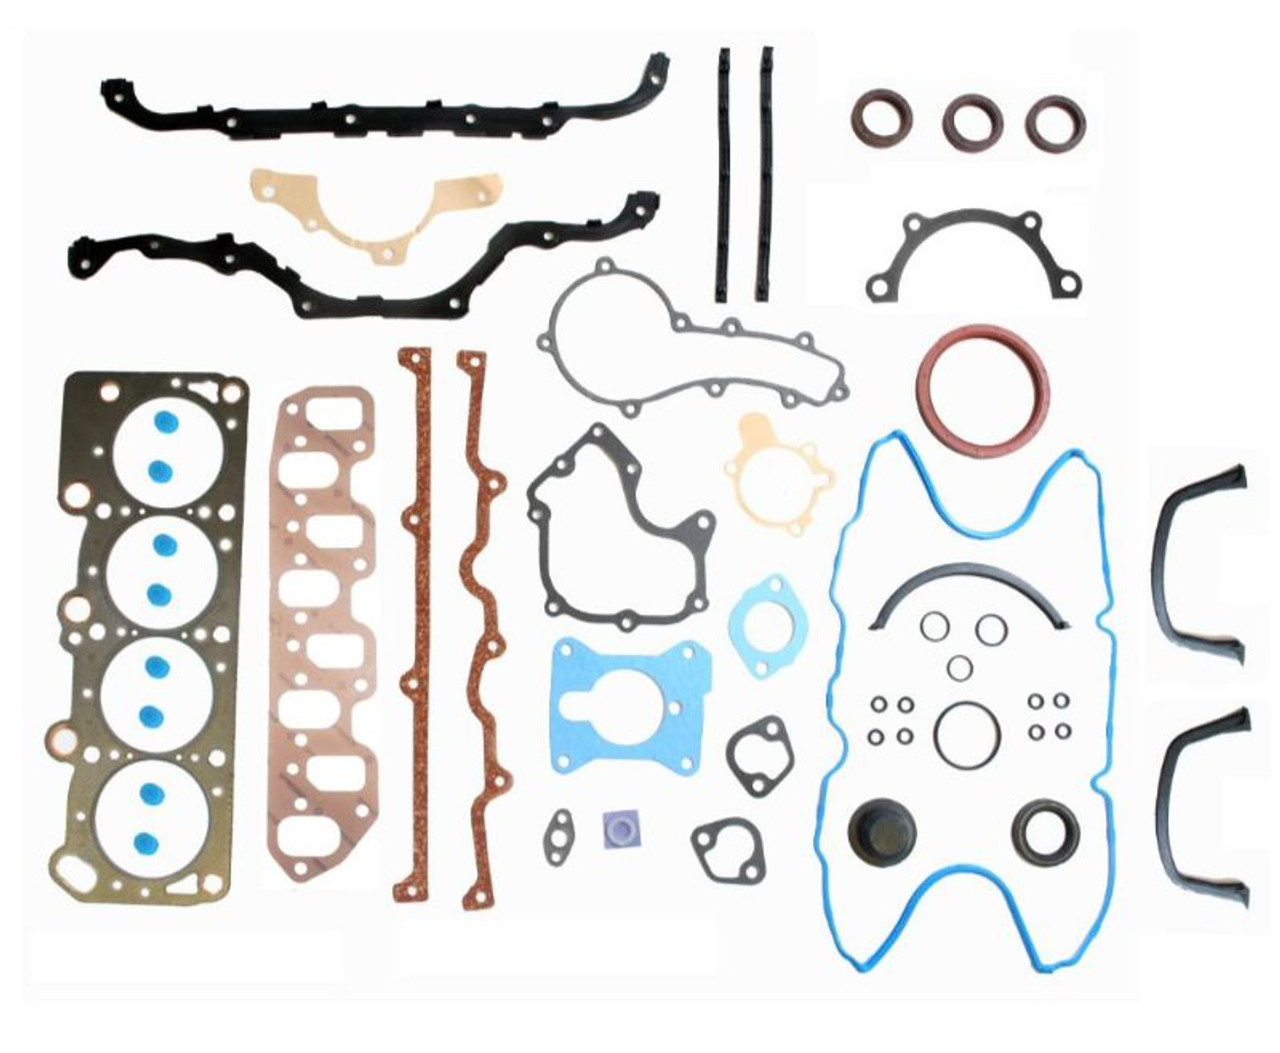 1988 Plymouth Grand Voyager 2.5L Engine Gasket Set CR2.5L-17 -11